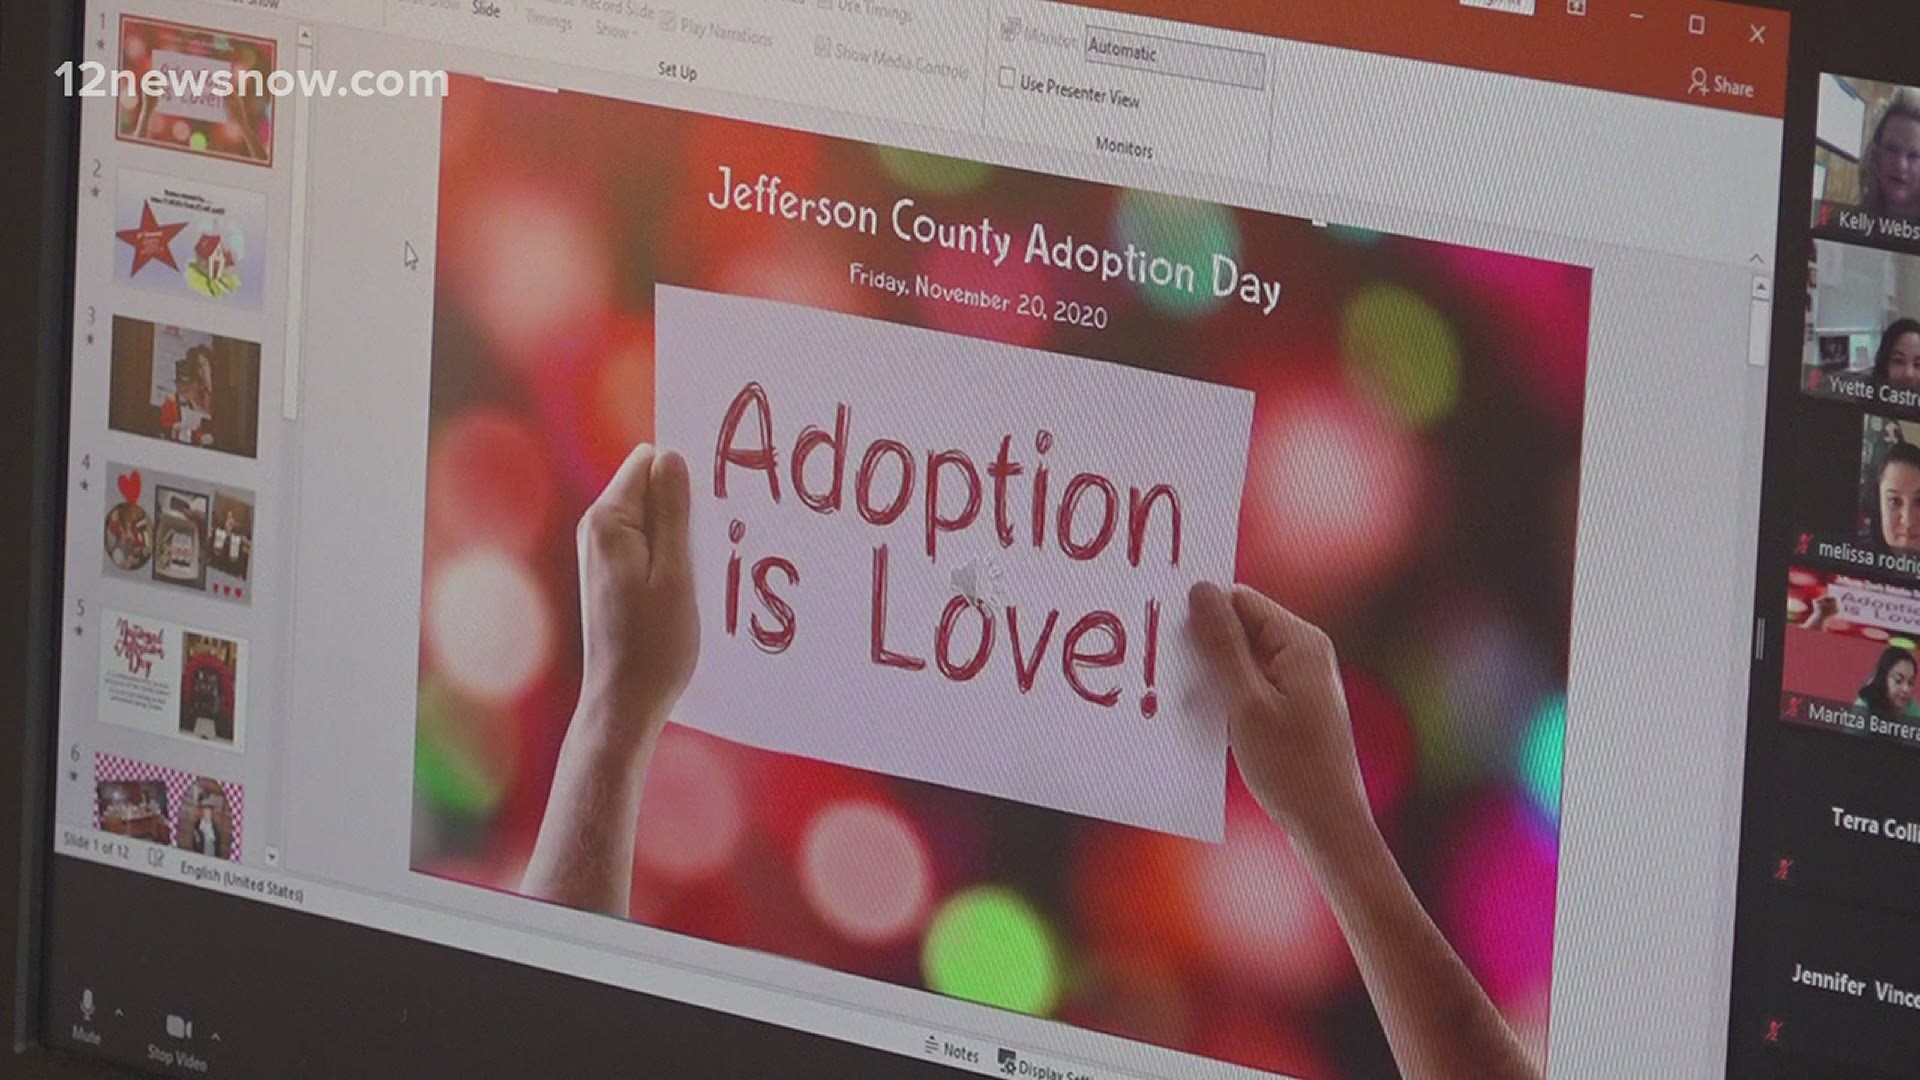 Despite the pandemic, there are still parents who want to adopt and children in need of a forever home. This SE Texas judge said the show must go on.